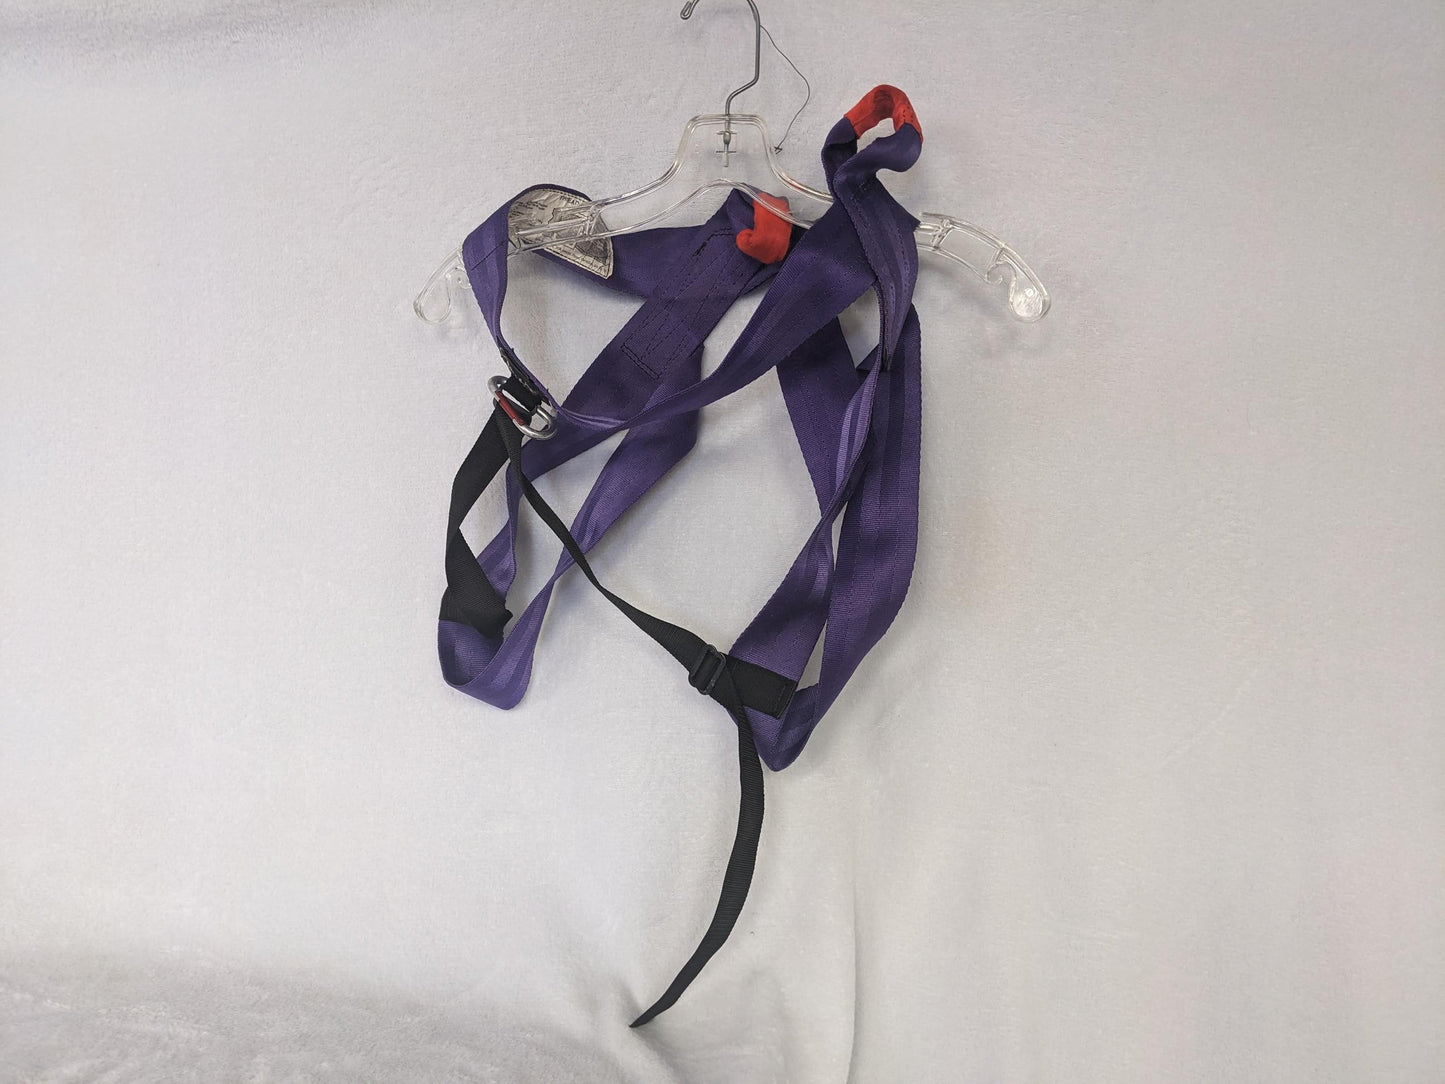 Bluewater Climbing Harness Size Large Color Purple Condition Used